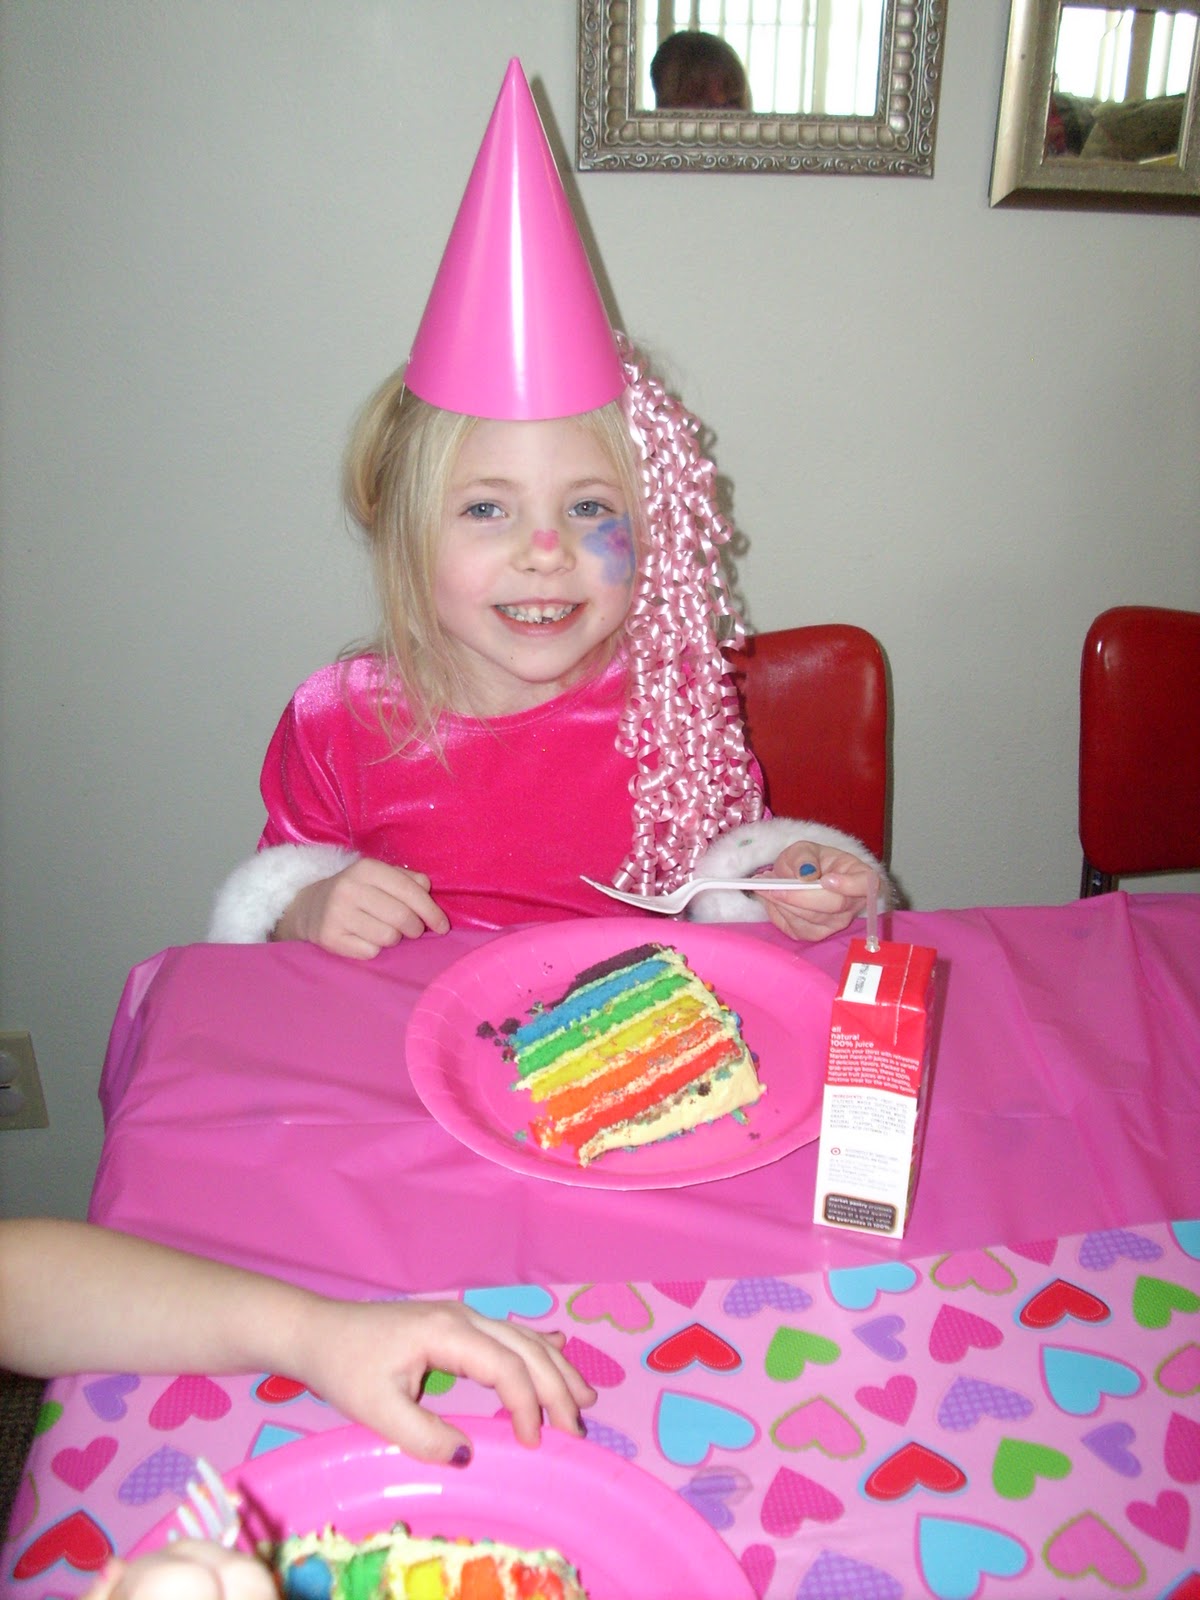 S for Sophie: My Little Pony Birthday